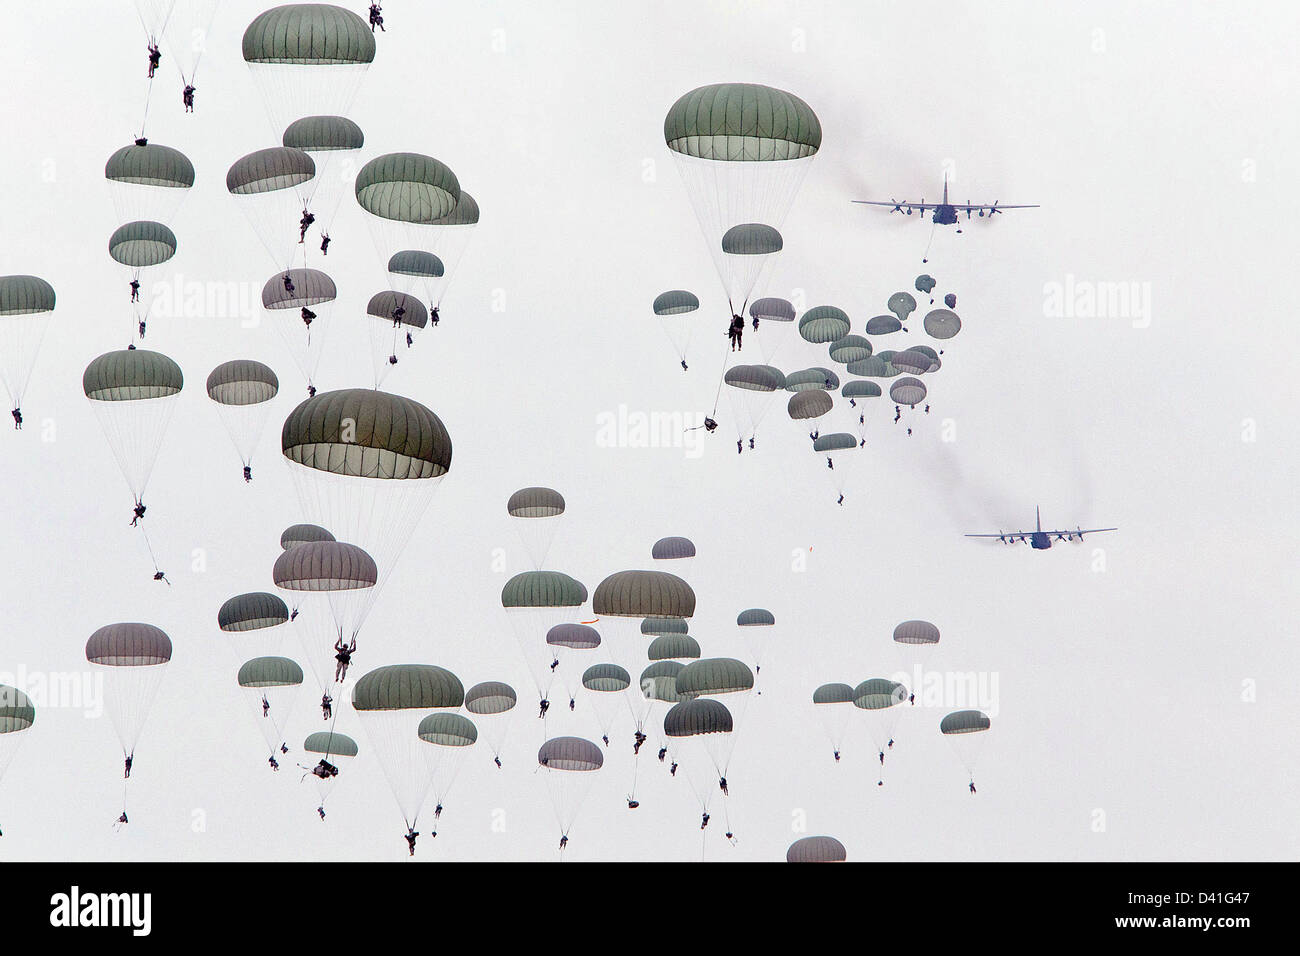 US Army 82nd Airborne Division soldiers parachute jump from Air Force C-130 Hercules aircraft during training February 25, 2013 at Fort Bragg, NC. Stock Photo